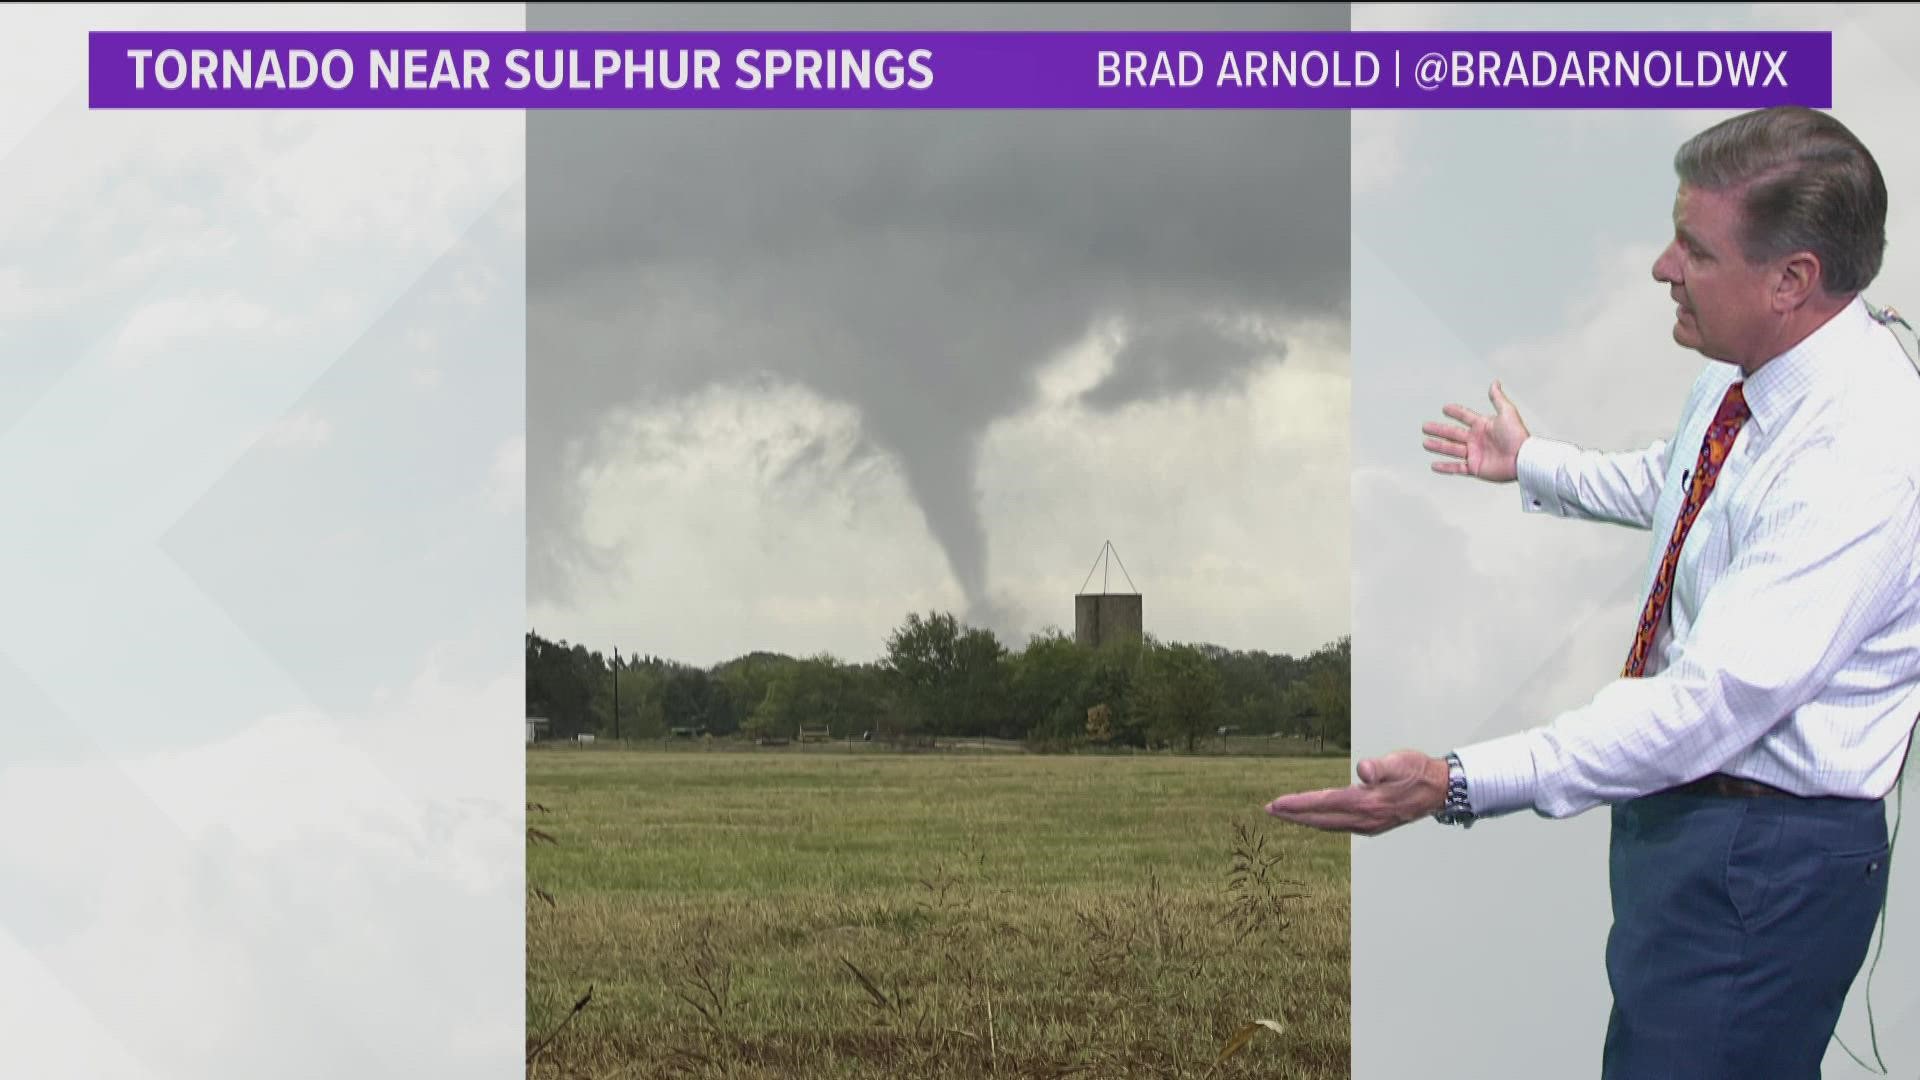 A large tornado is on the ground now near Sulphur Springs, Texas.